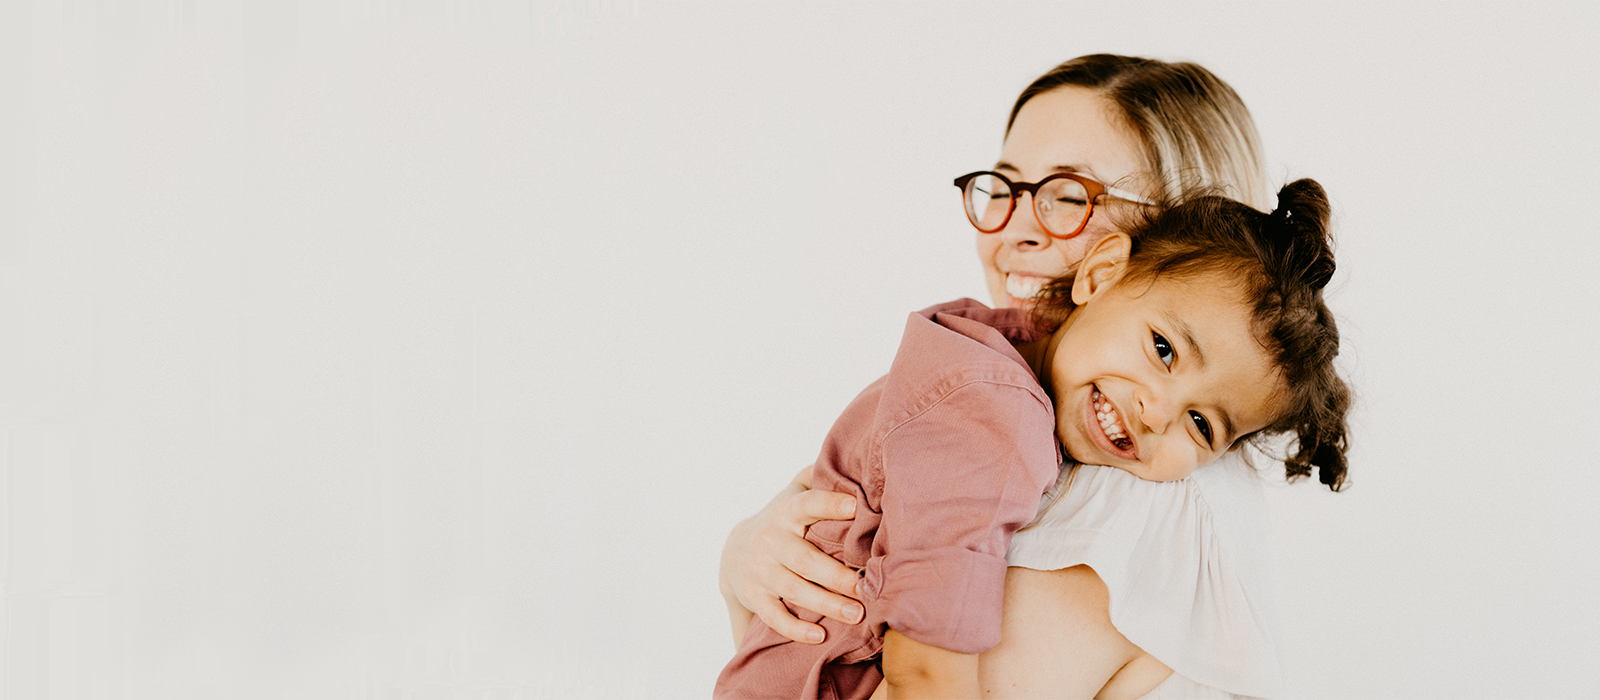 young girl smiling at the camera while being hugged by her mother